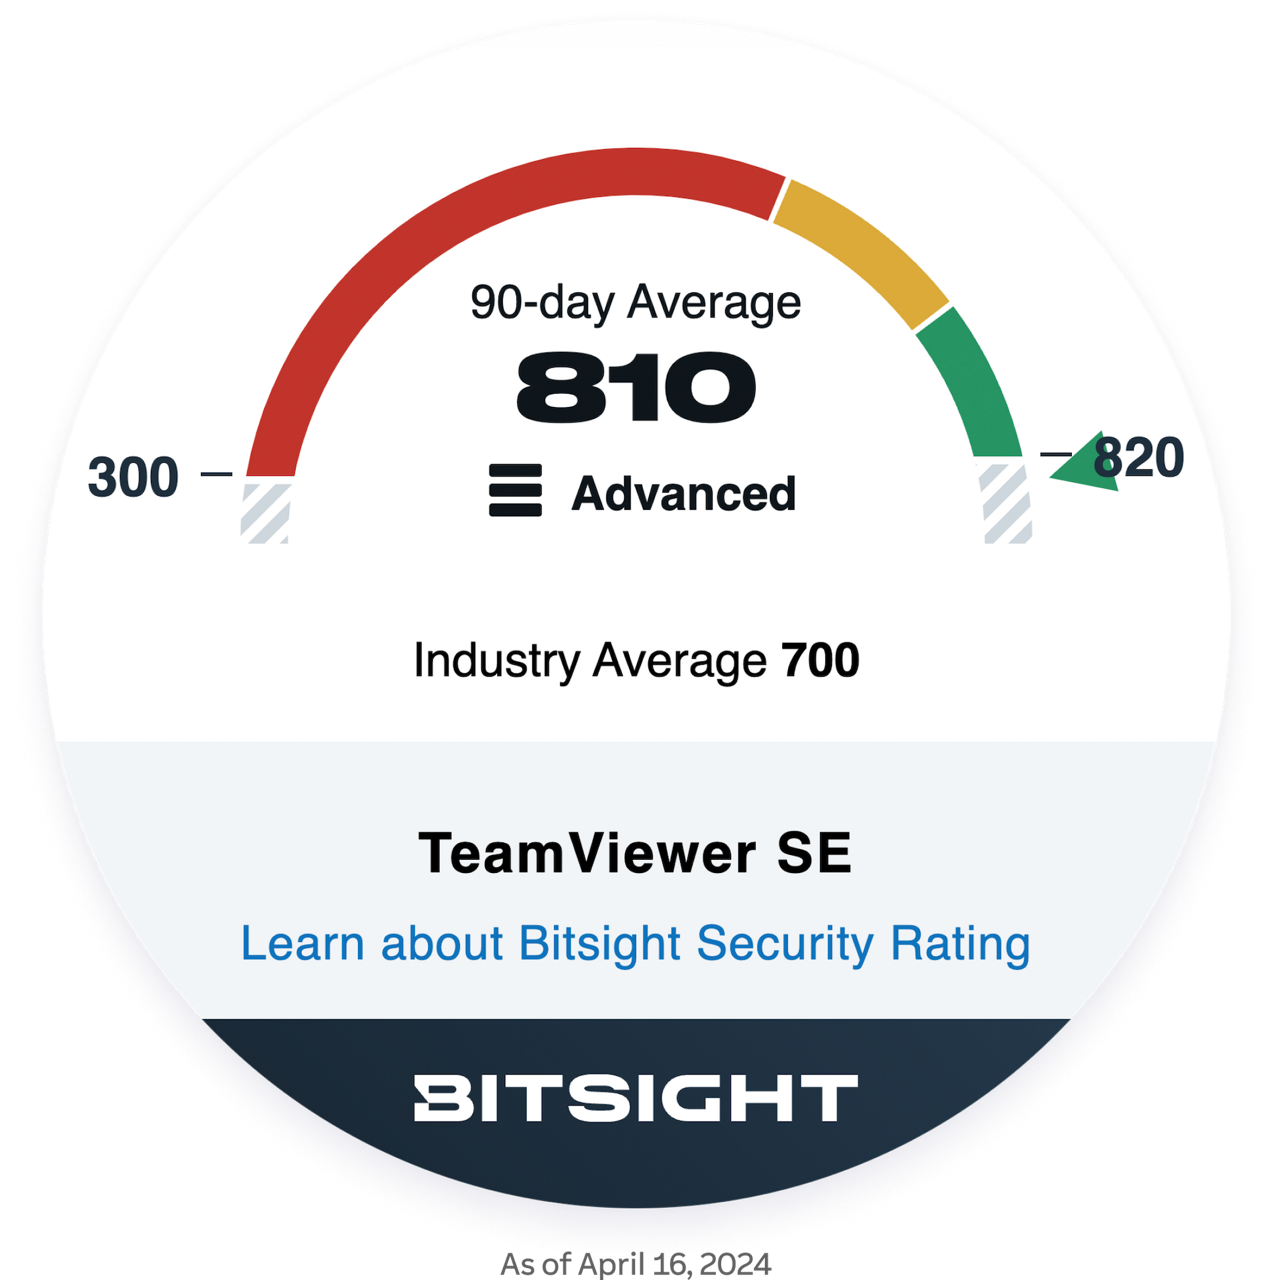 TeamViewer is highly rated by Bitsight